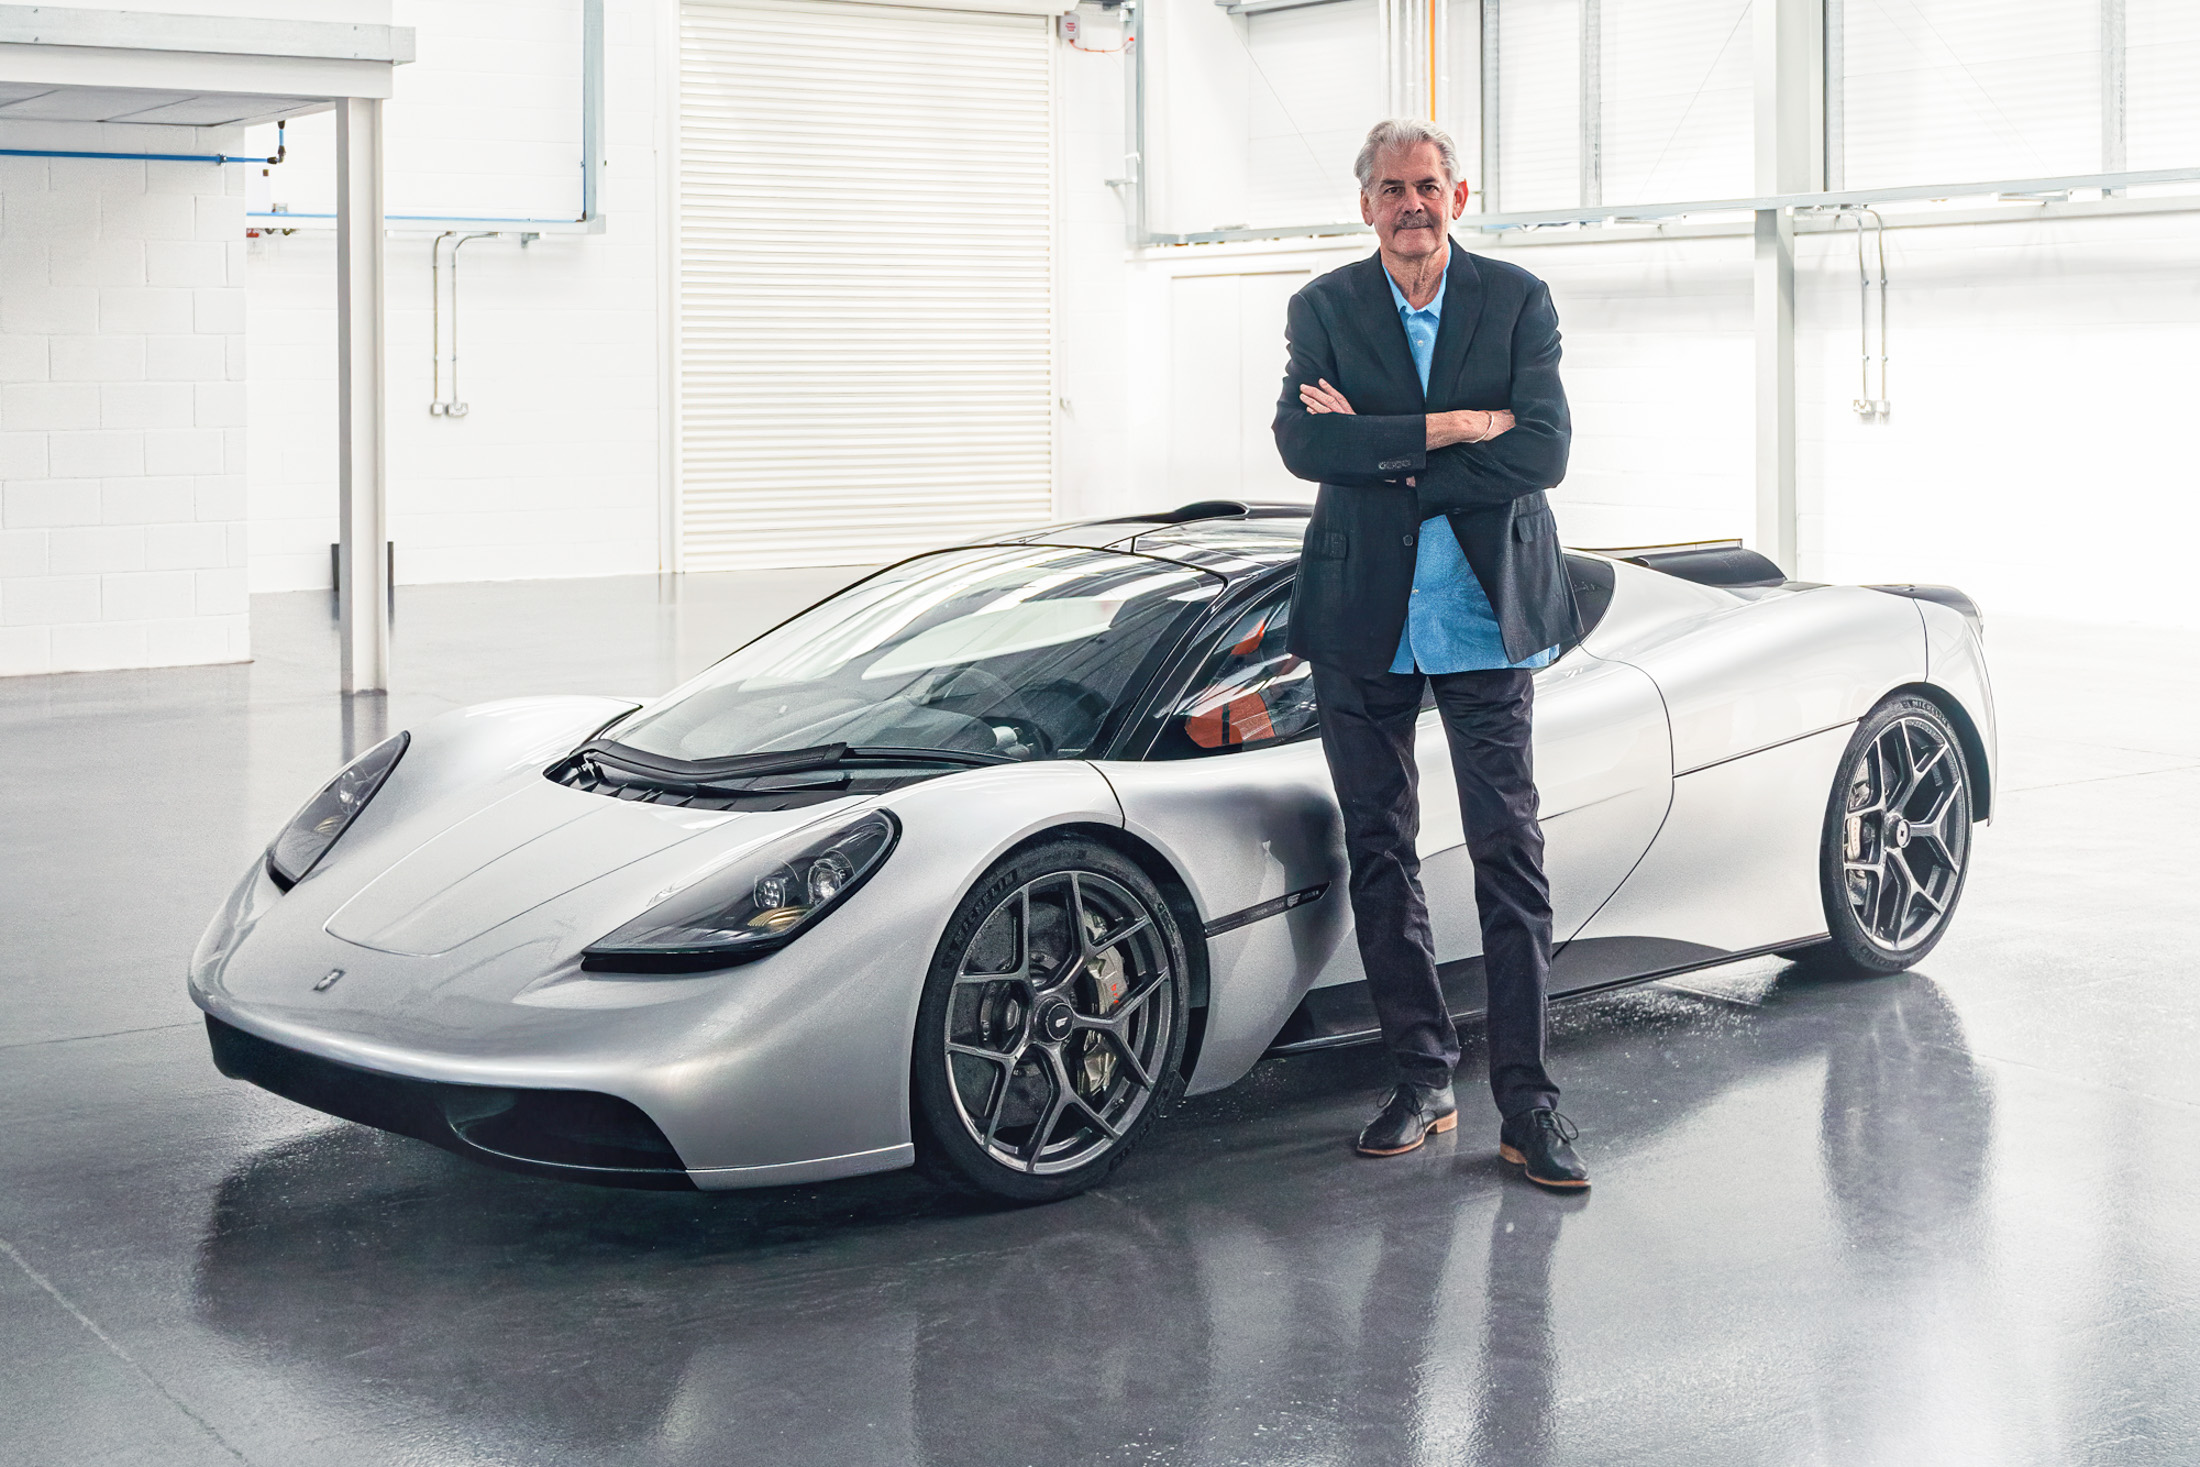 Gordon Murray T.50 Supercar Does the McLaren F1 One Better - Bloomberg